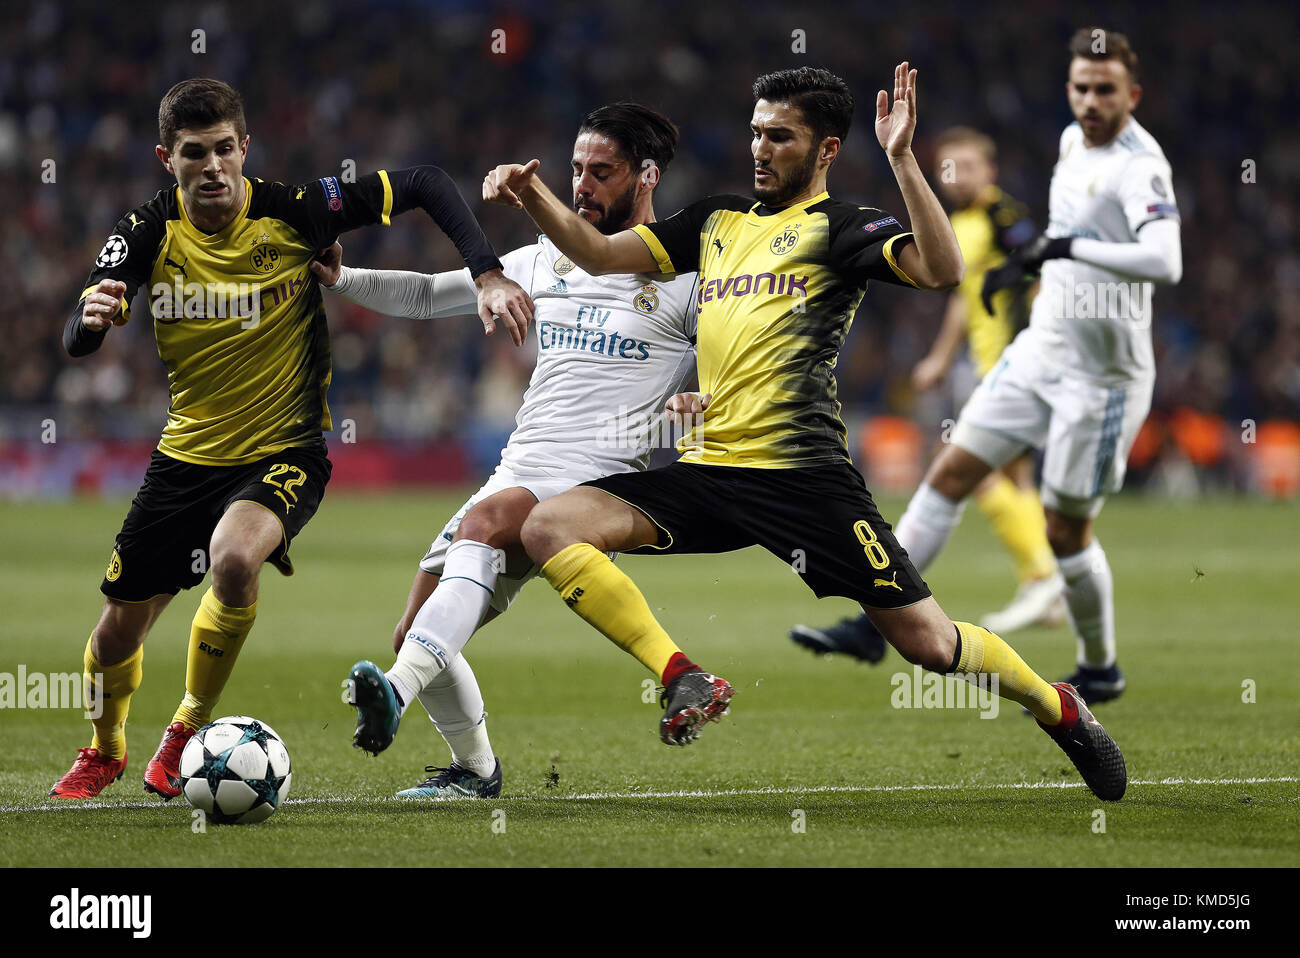 Madrid, Spain. 6th Dec, 2017. Isco of Real Madrid is challenged by Sahin of Borussia Dortmund during the UEFA Champions League group H match between Real Madrid and Borussia Dortmund at Santiago Bernabéu. Credit: Manu reino/SOPA/ZUMA Wire/Alamy Live News Stock Photo